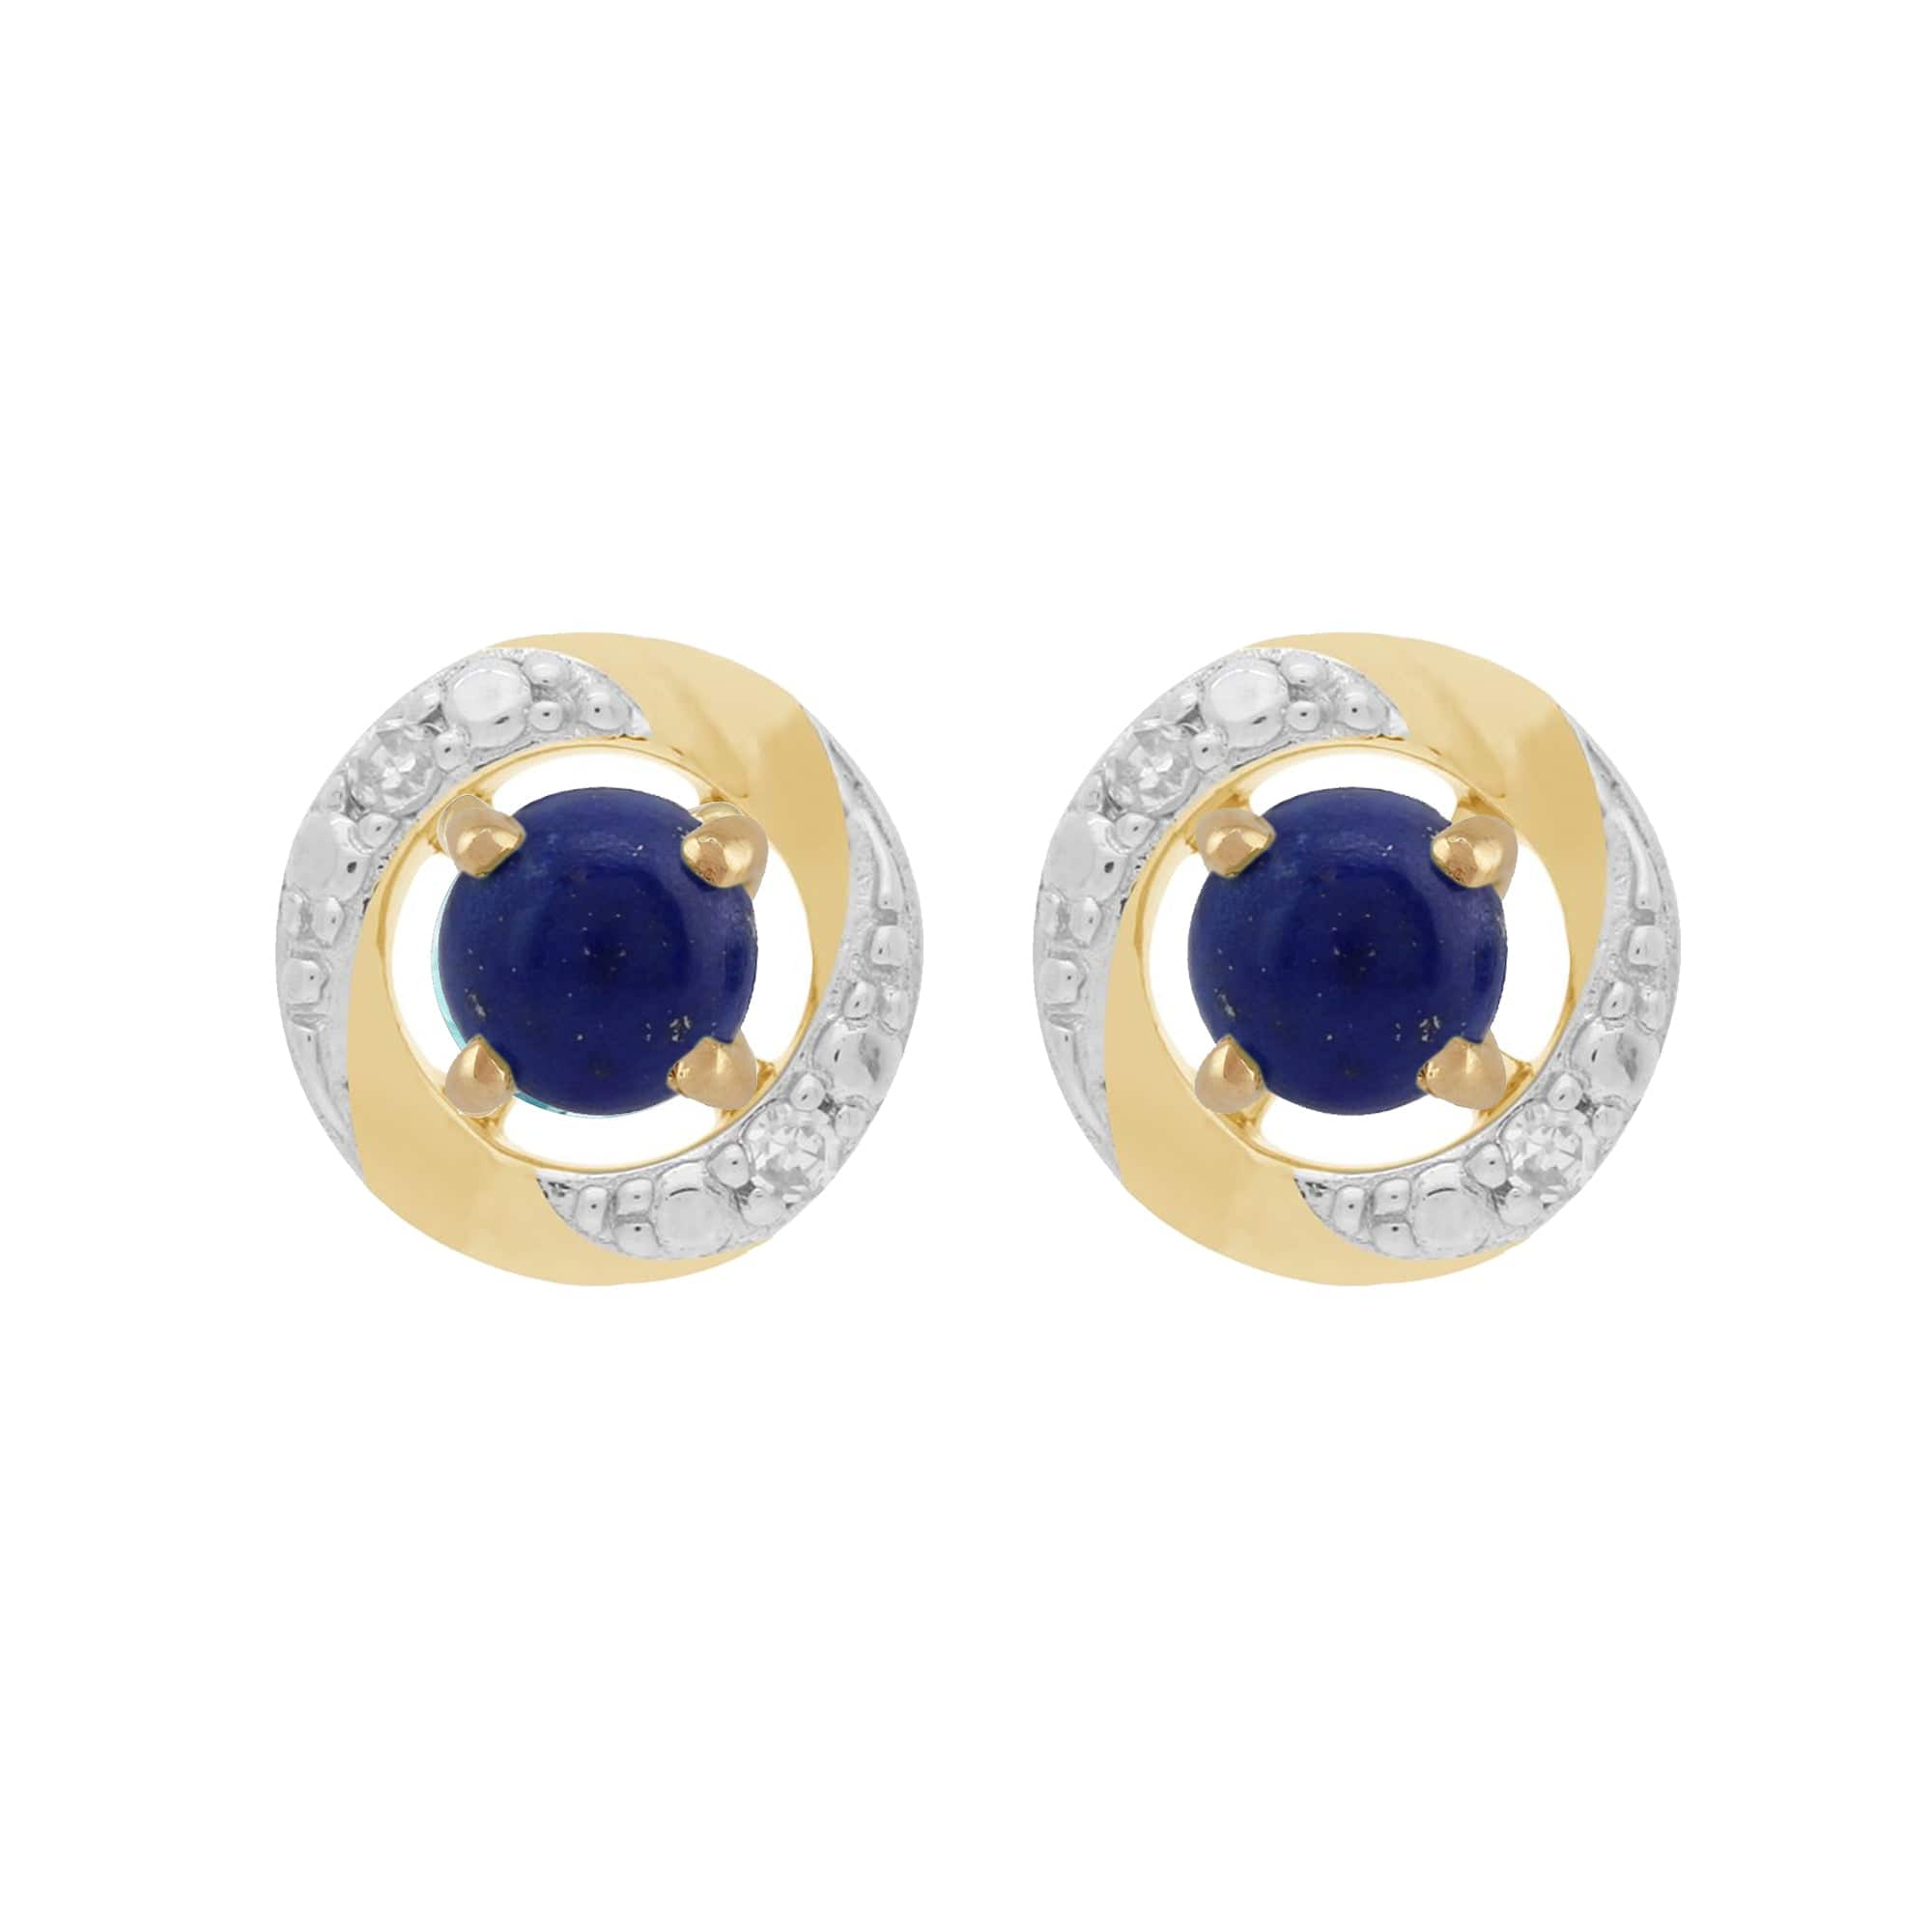 183E0083419-191E0374019 Classic Round Lapis Lazuli Stud Earrings with Detachable Diamond Halo Ear Jacket in 9ct Yellow Gold 1